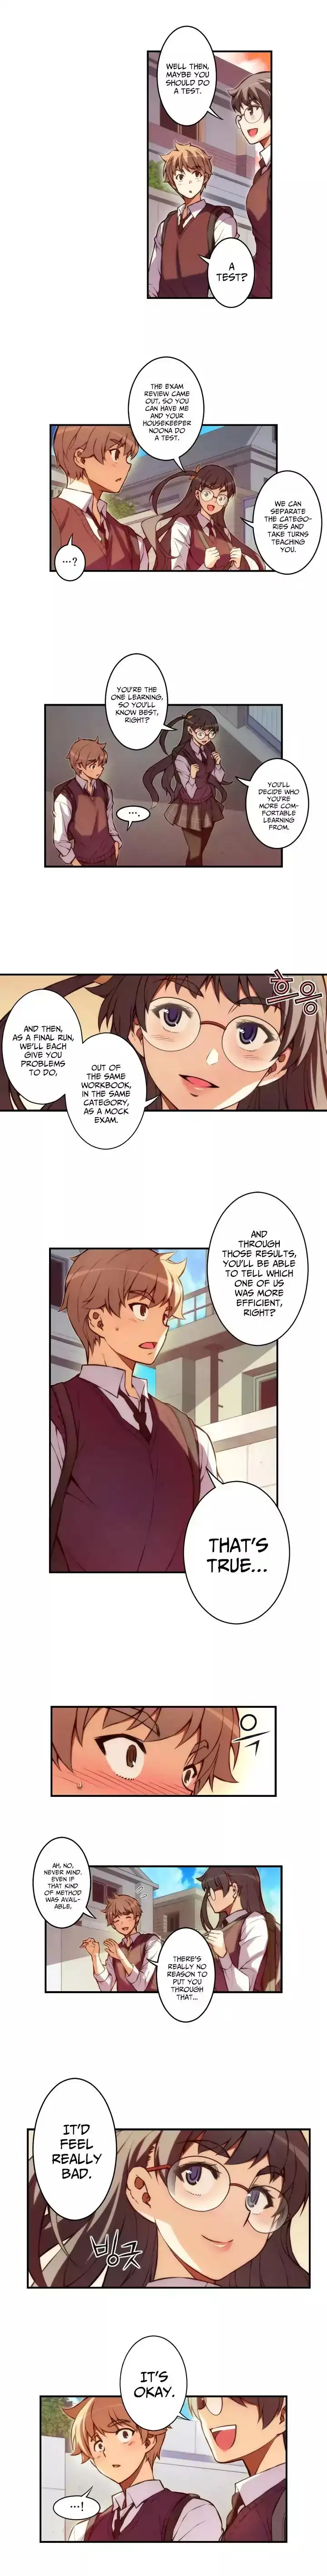 The Fiancées Live Together - Chapter 29 Page 5